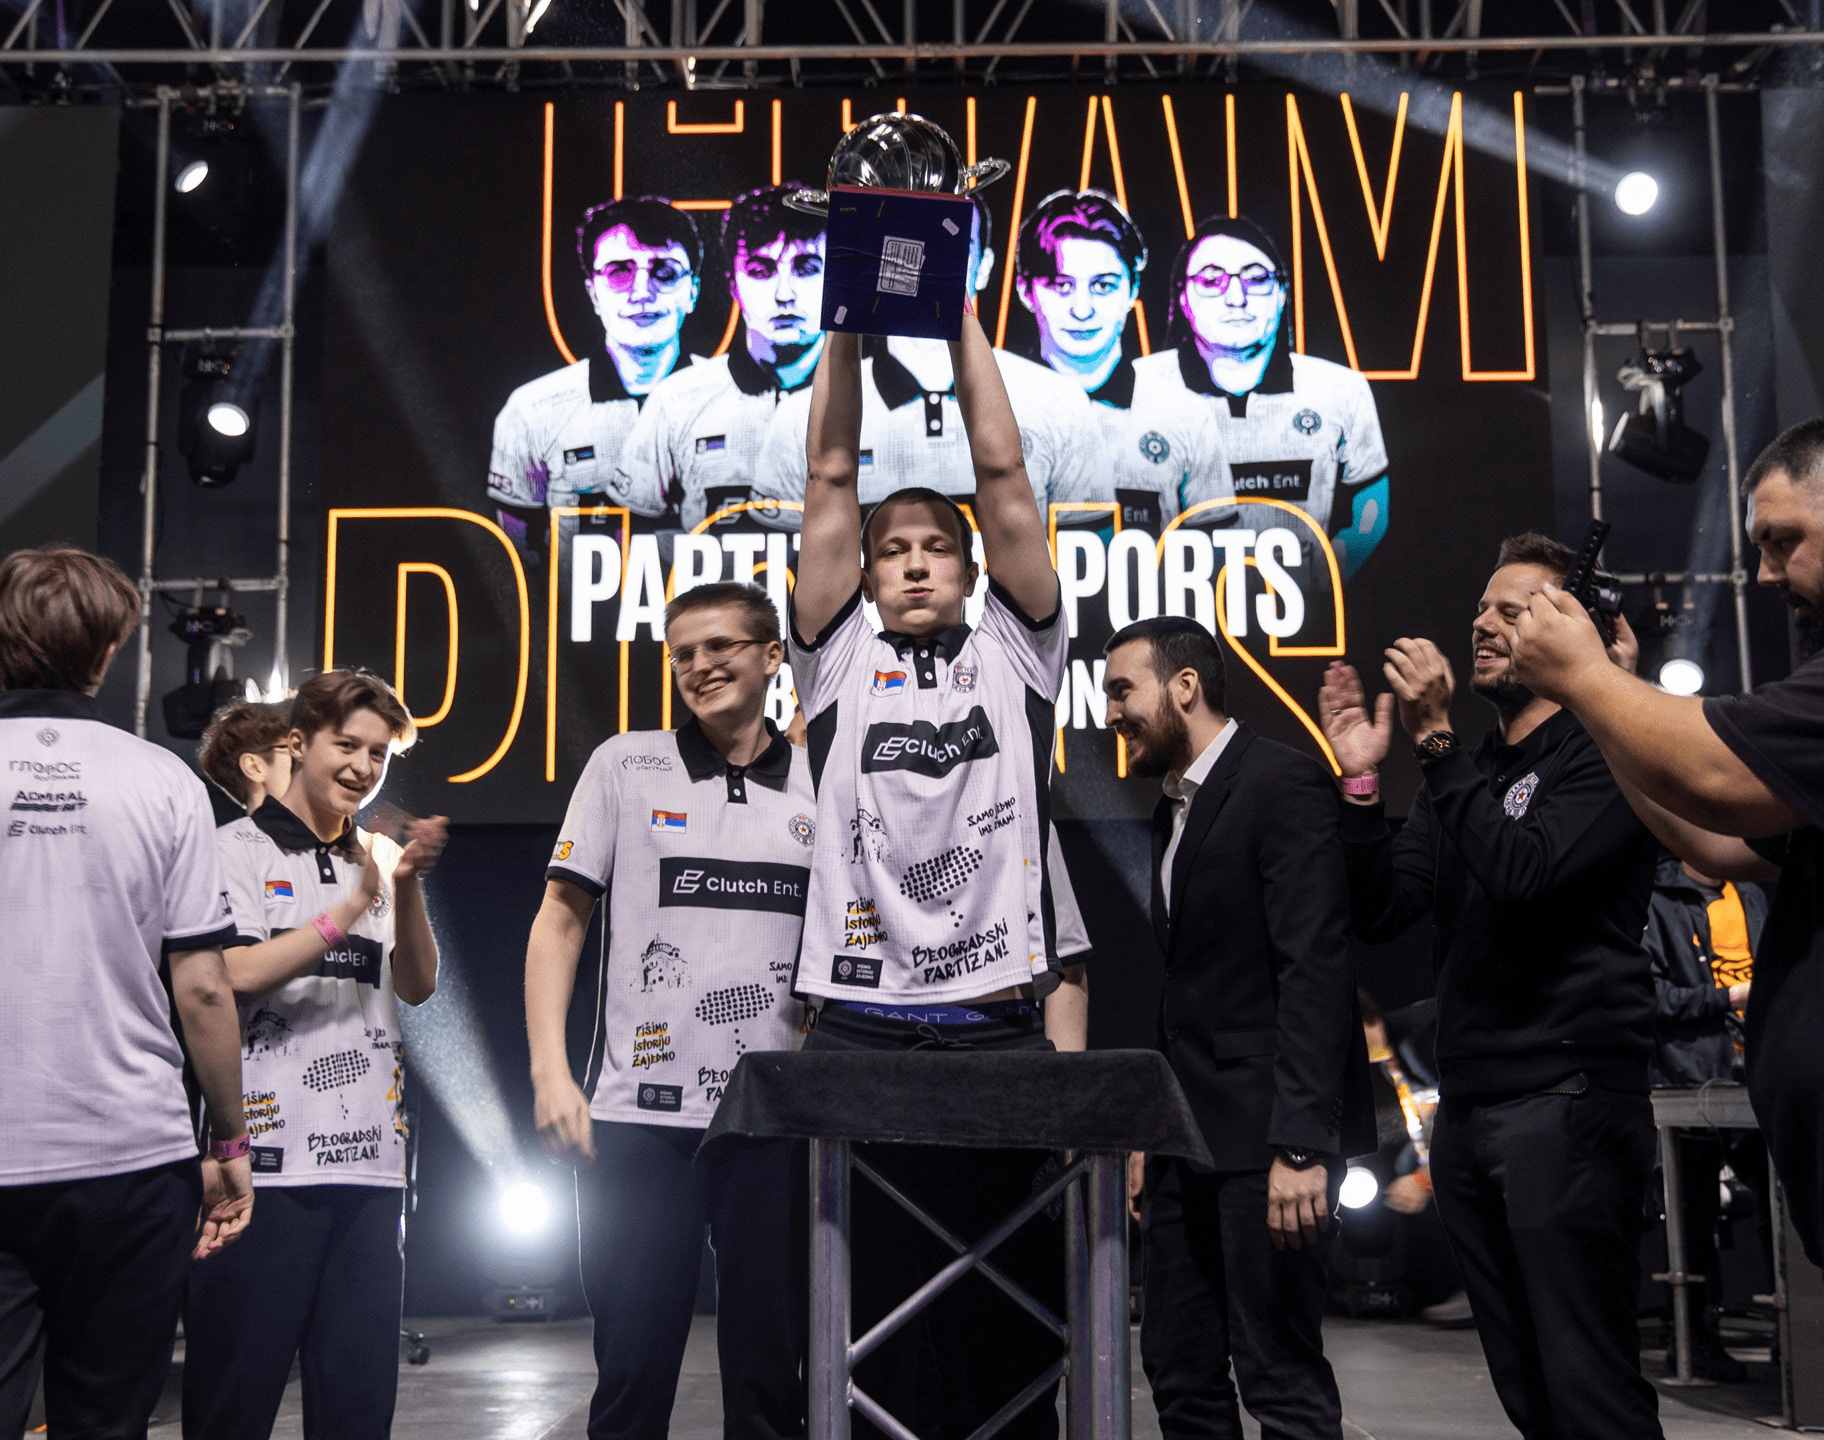 Partizan Sn1lle, lifting the EBL trophy. Credit: Fortuna